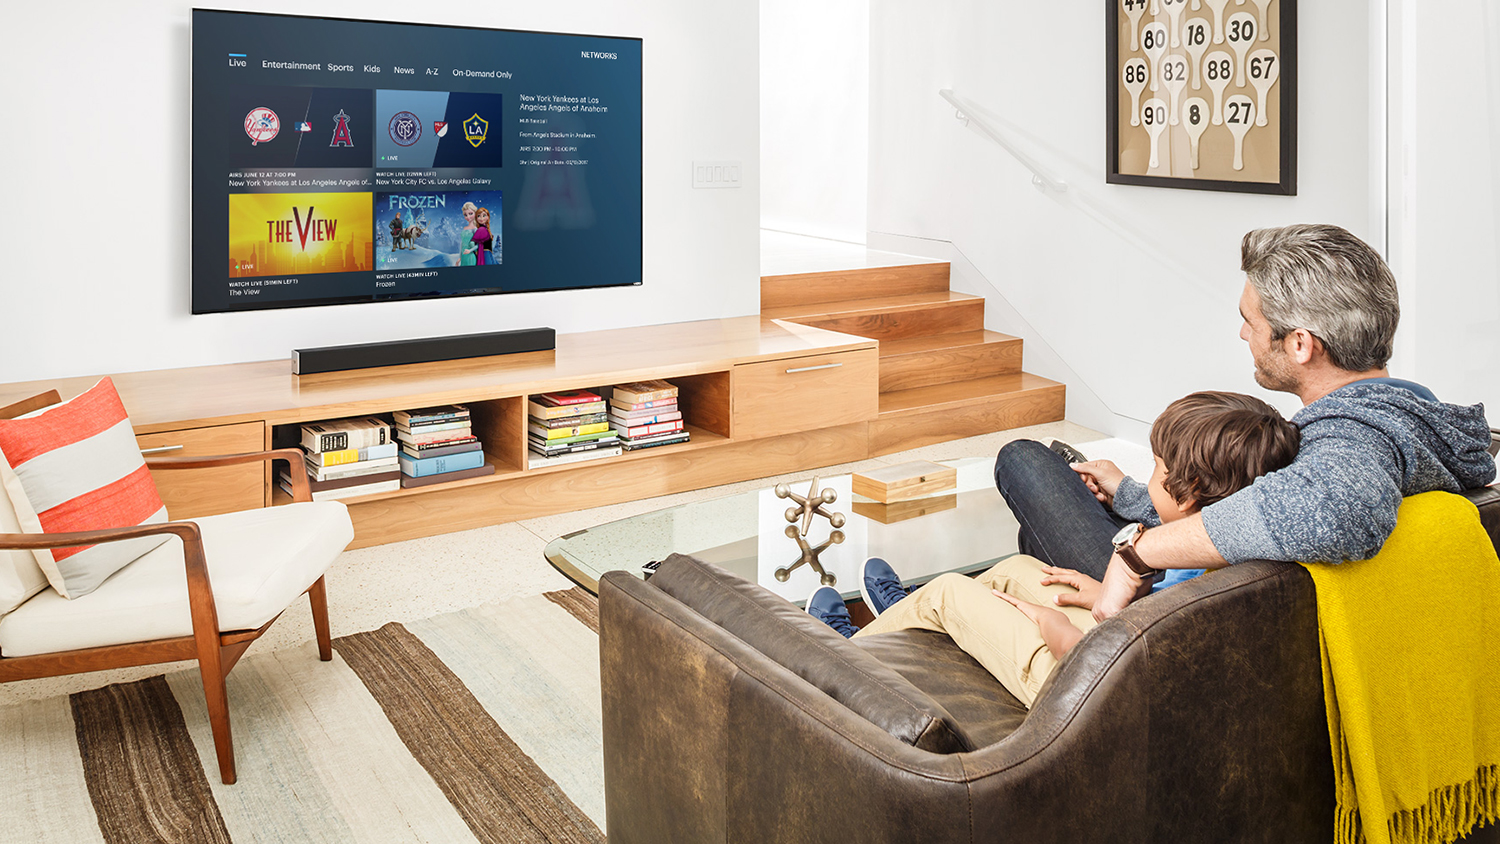 Best live TV streaming services Hulu, Sling, YouTube, more Digital Trends